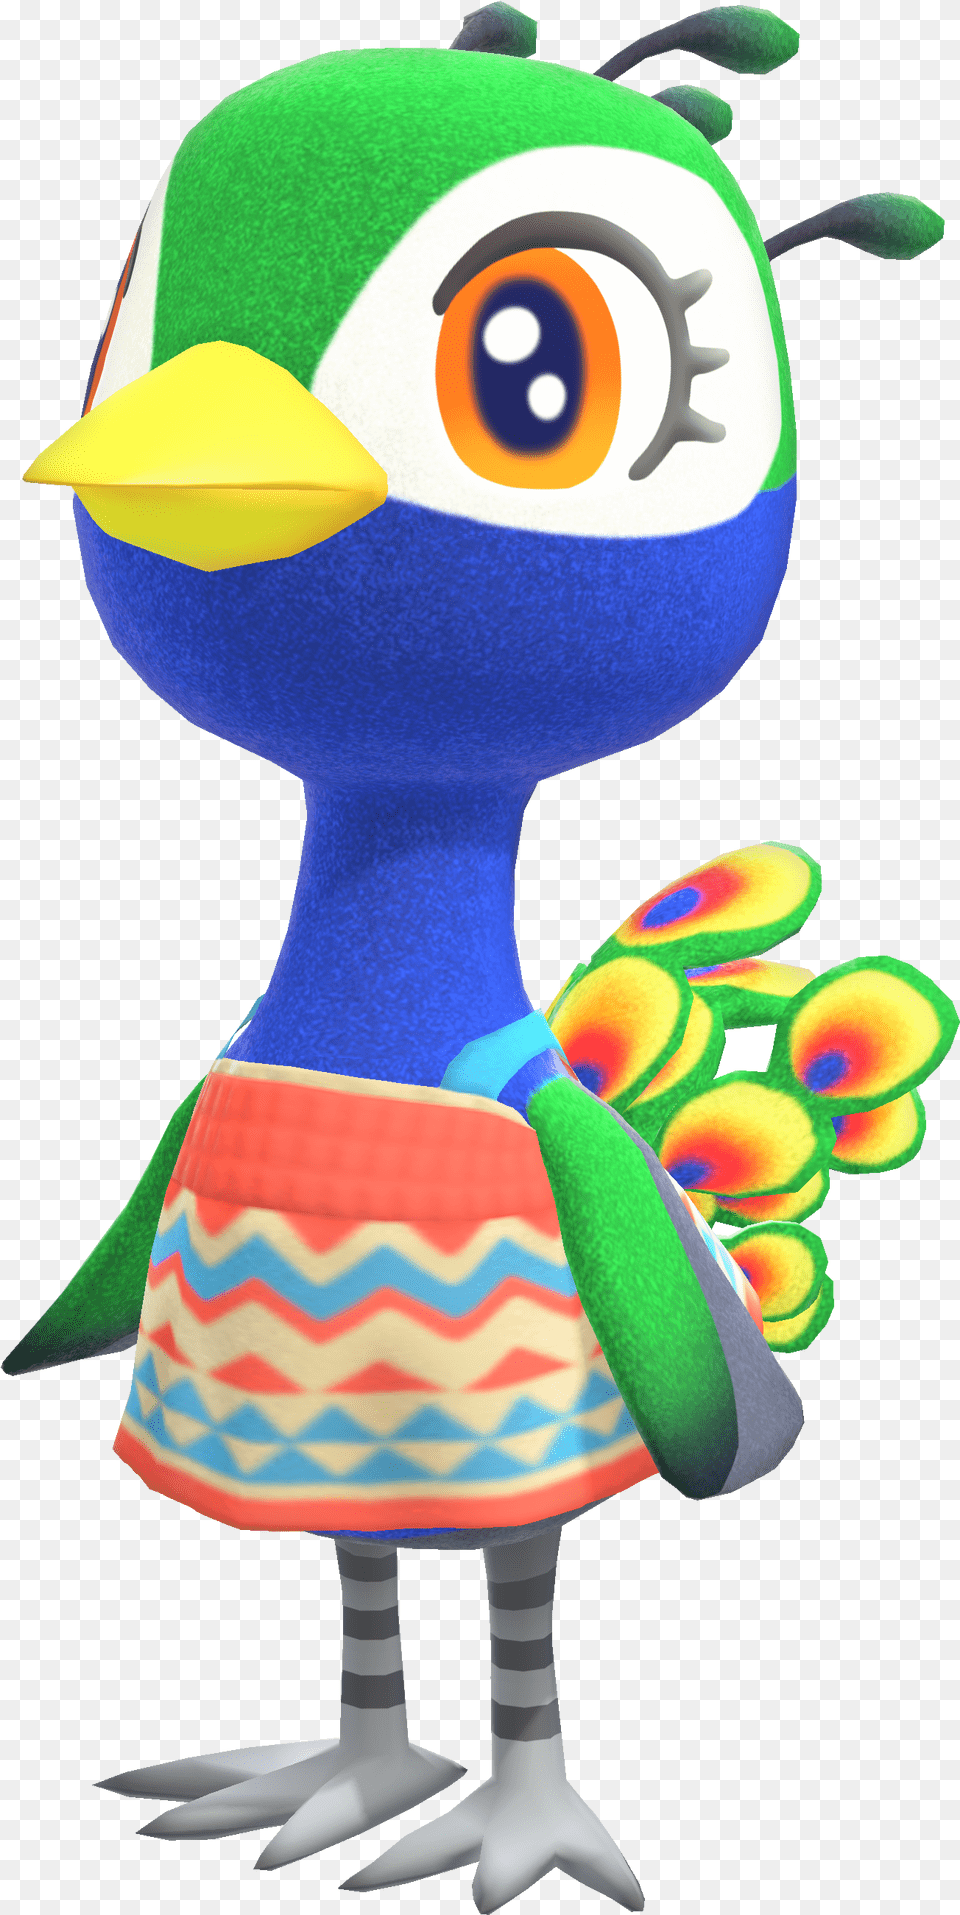 Julia Animal Crossing Item And Villager Database Villagerdb Peacock Animal Crossing New Horizons, Toy, Art, Graphics Free Png